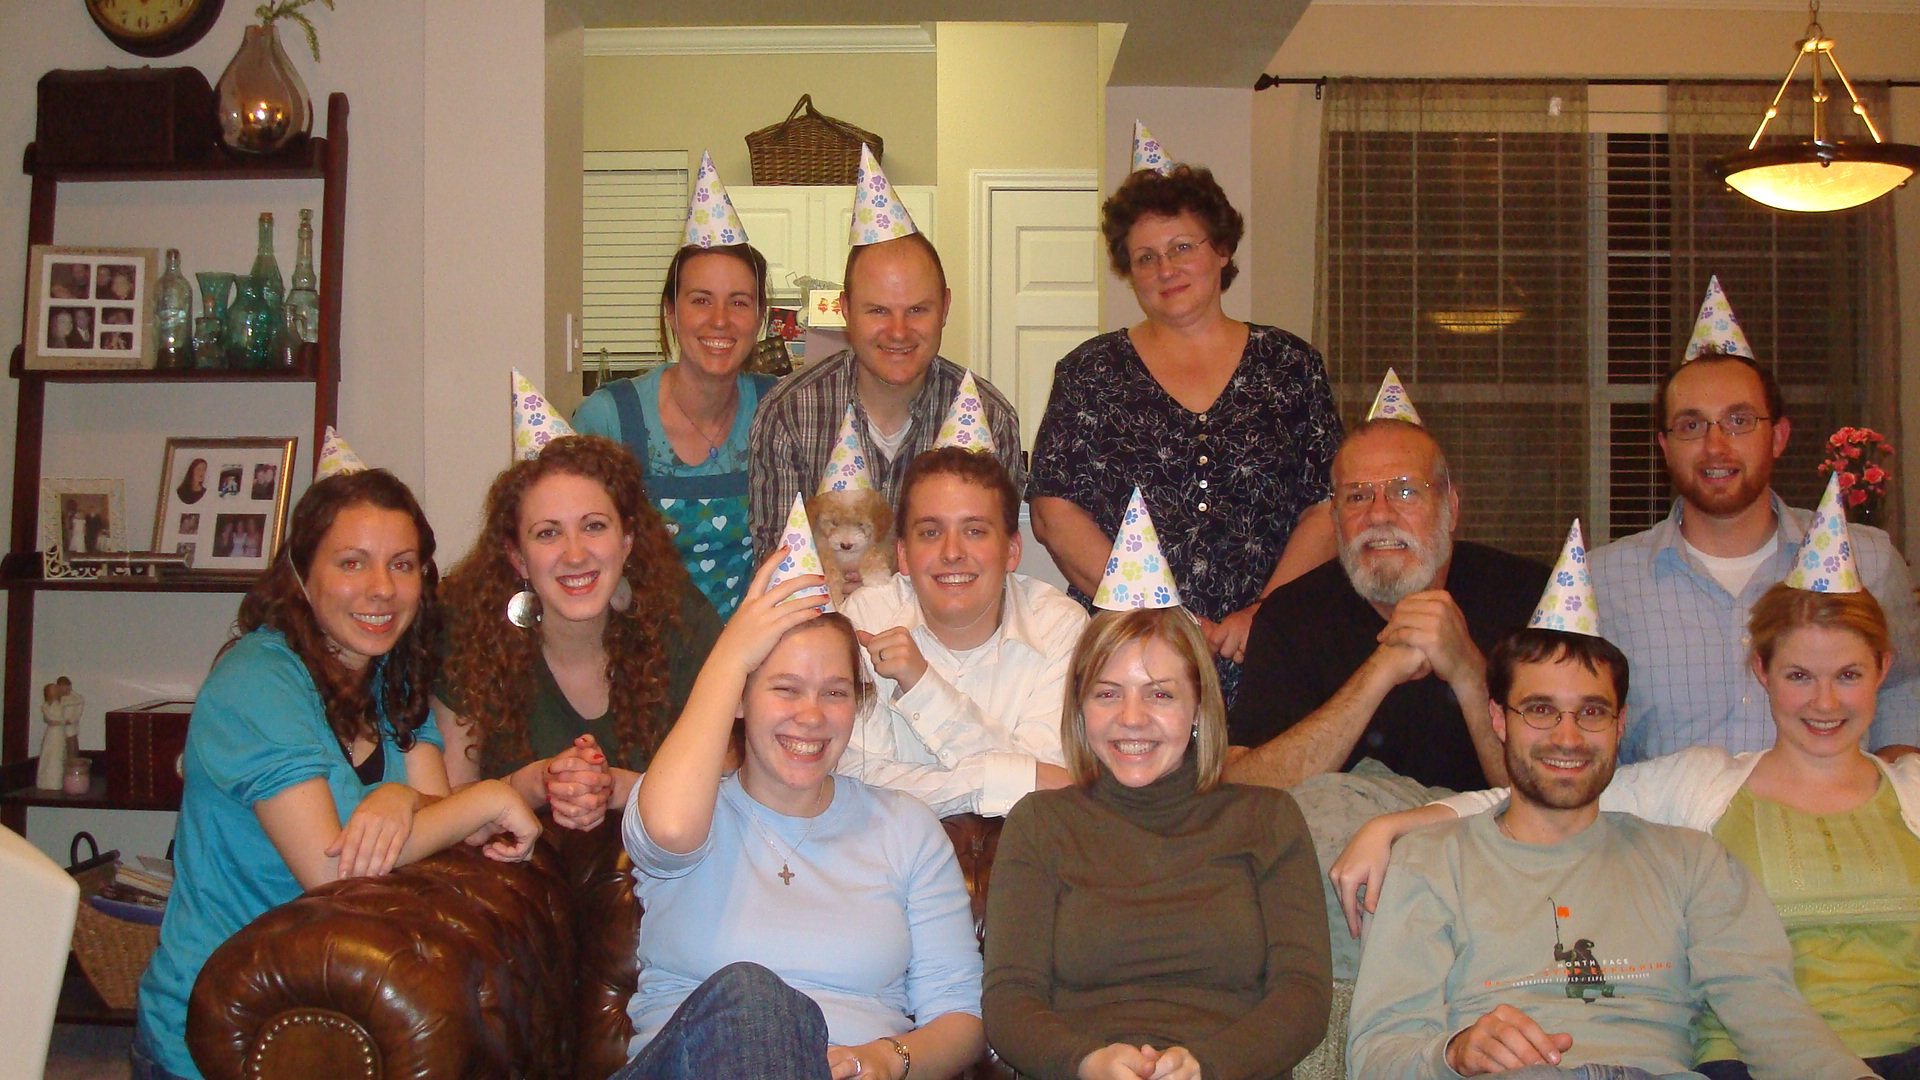 Group picture in party hats!